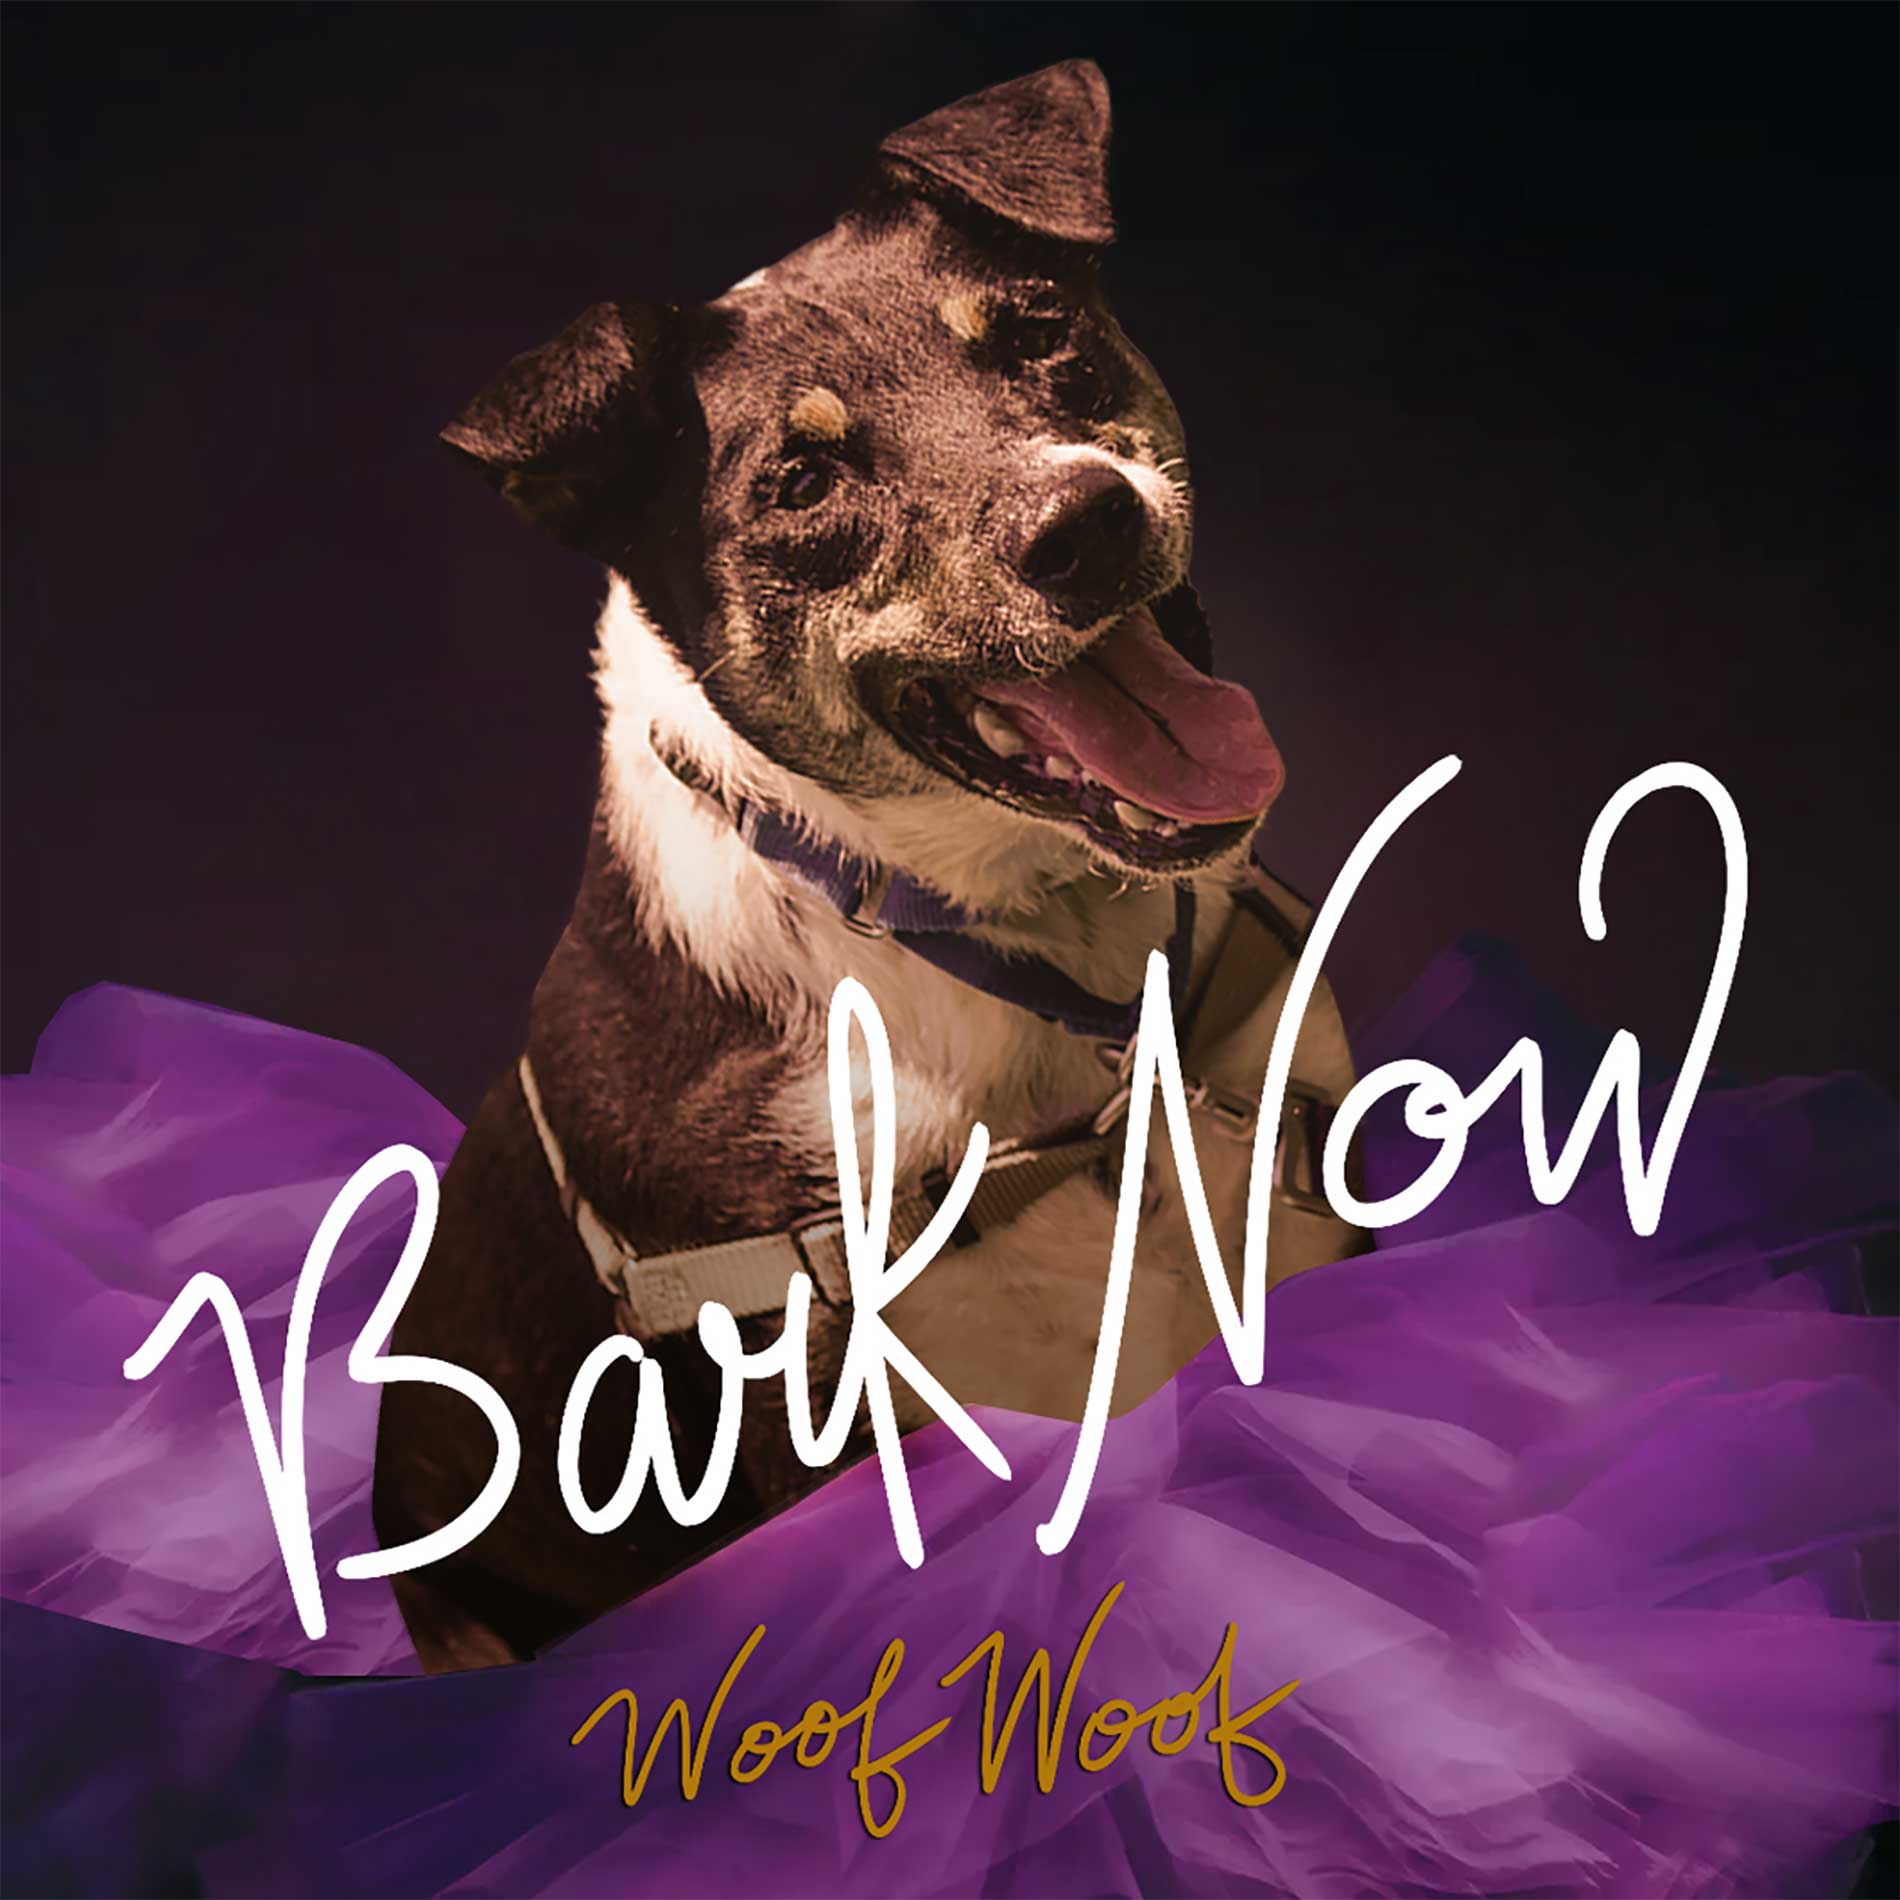 An image of a happy looking dog styled to resemble a Taylor Swift album cover.